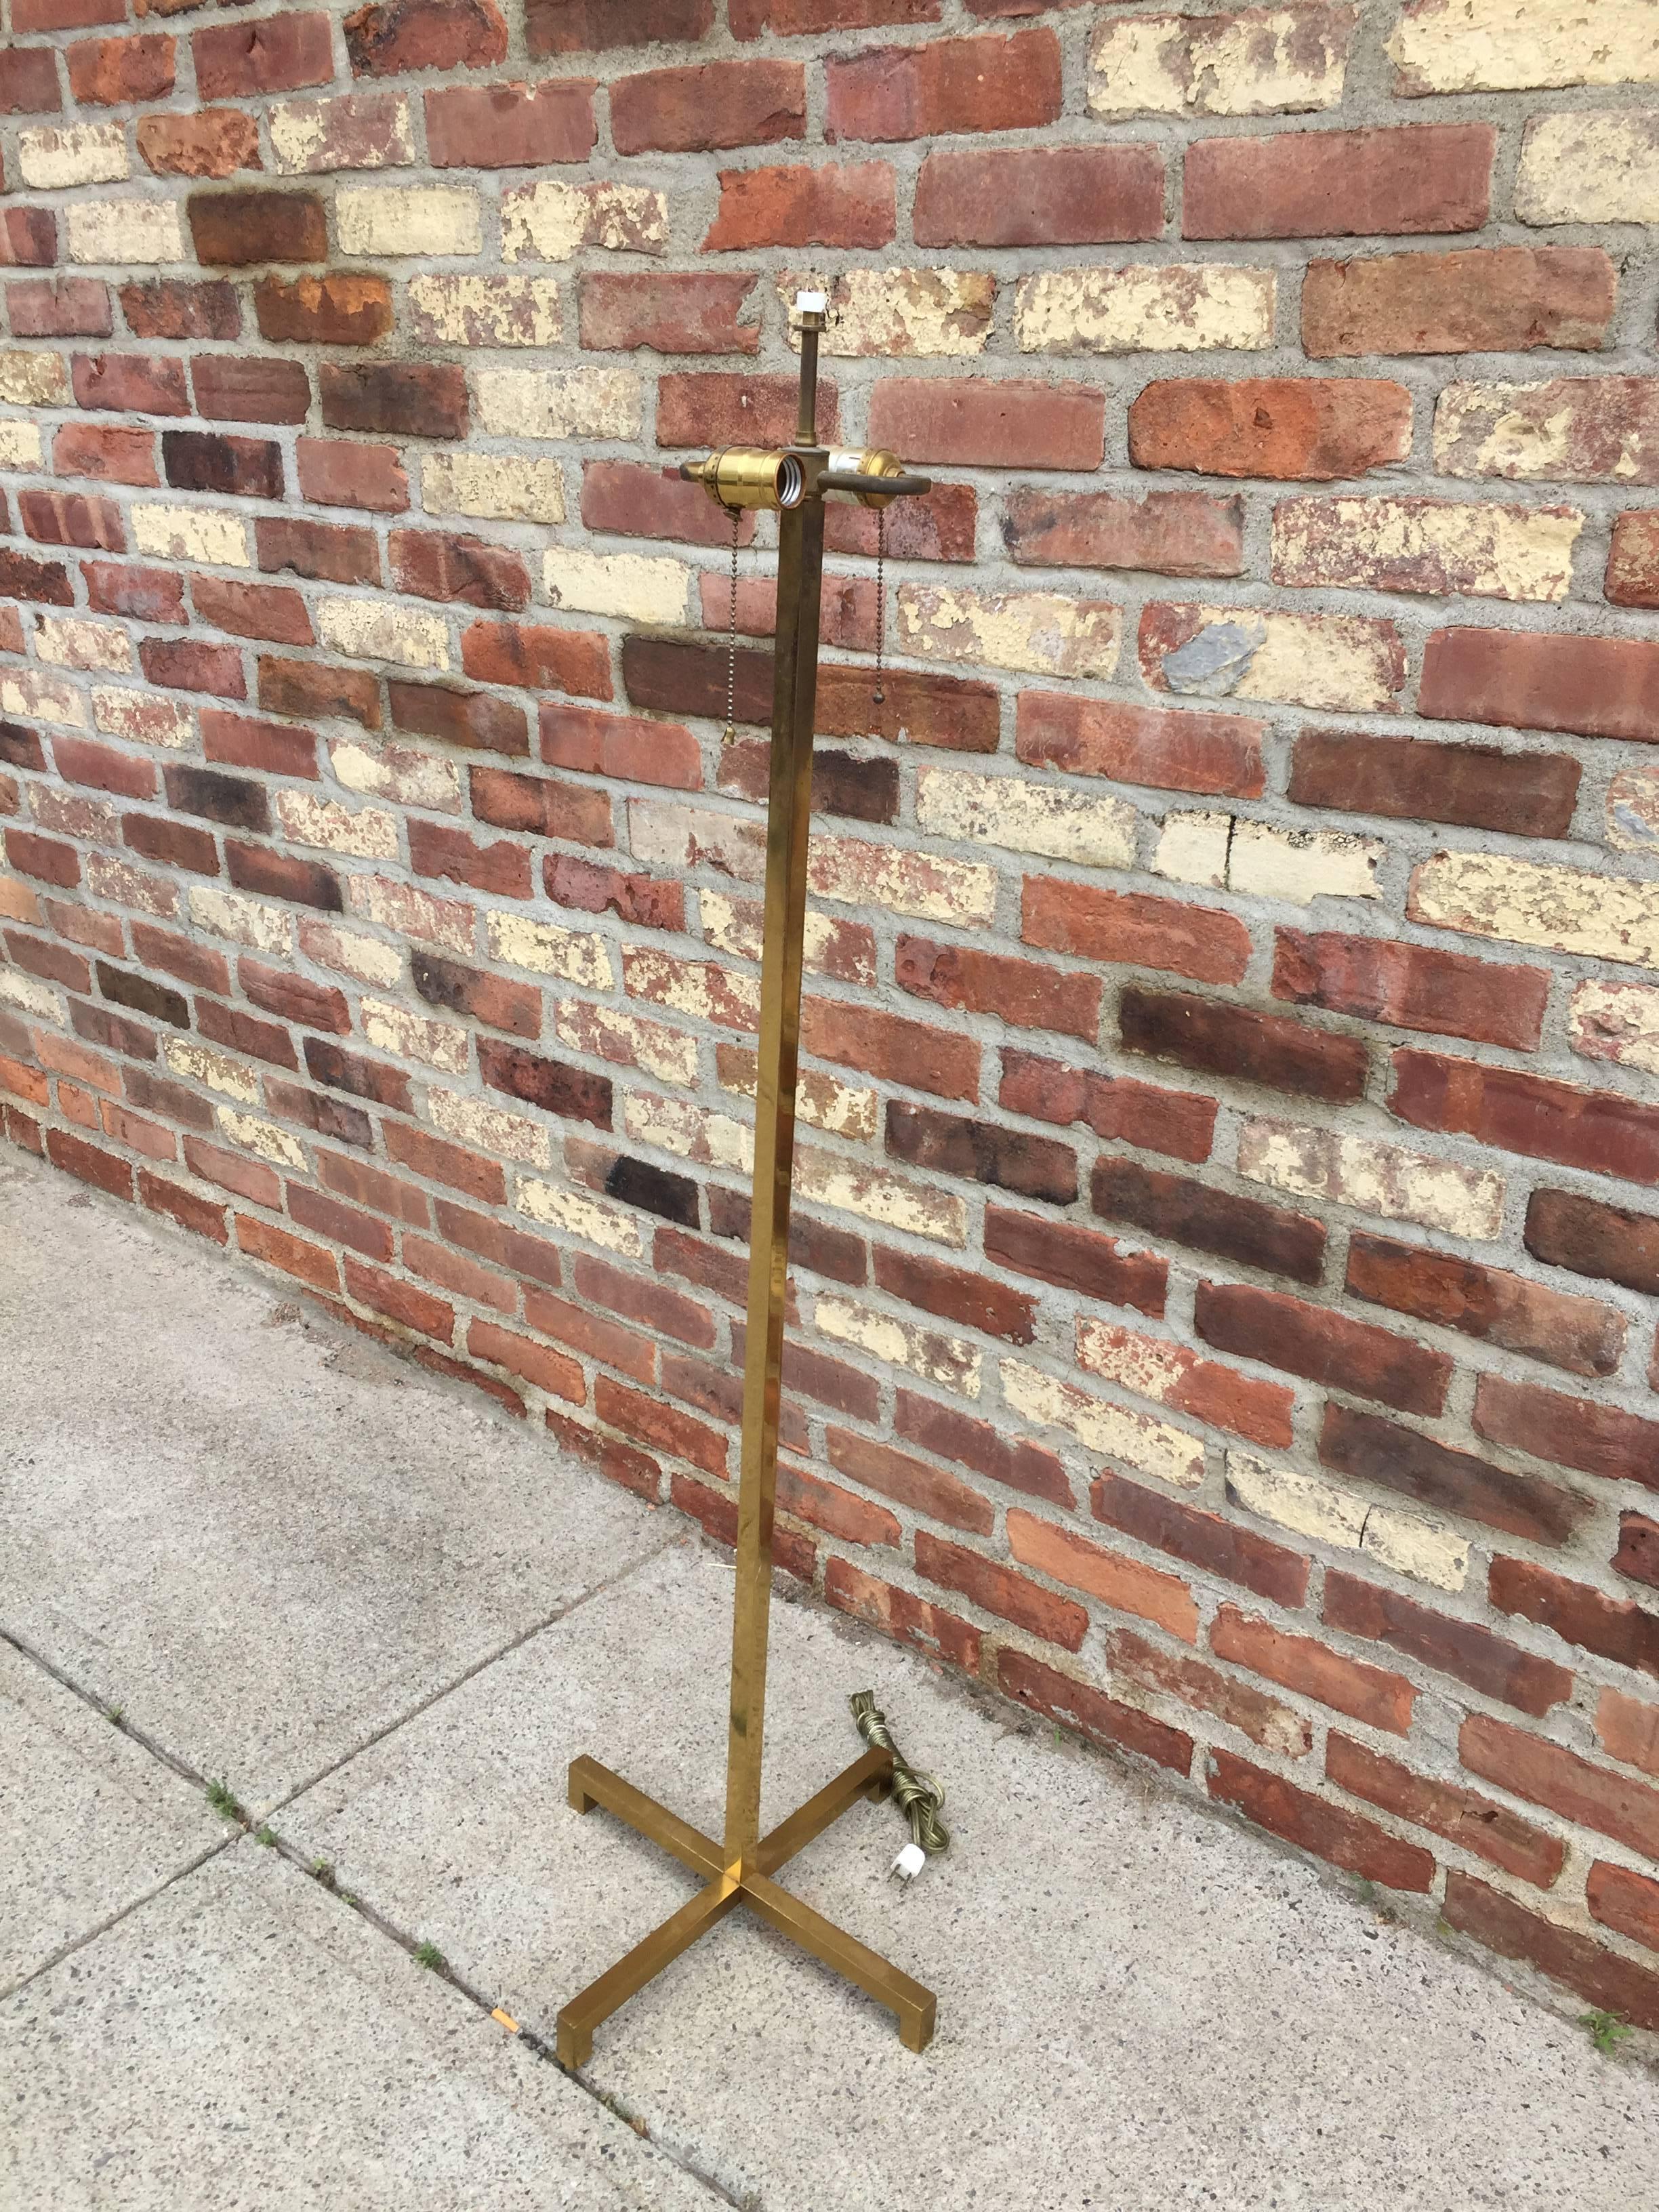 Solid brass with cruciform base for Hansen Lighting of New York. Beautiful old example of this simple and elegant design. Features two sockets with chain pulls and original diffuser with Hansen stamp.